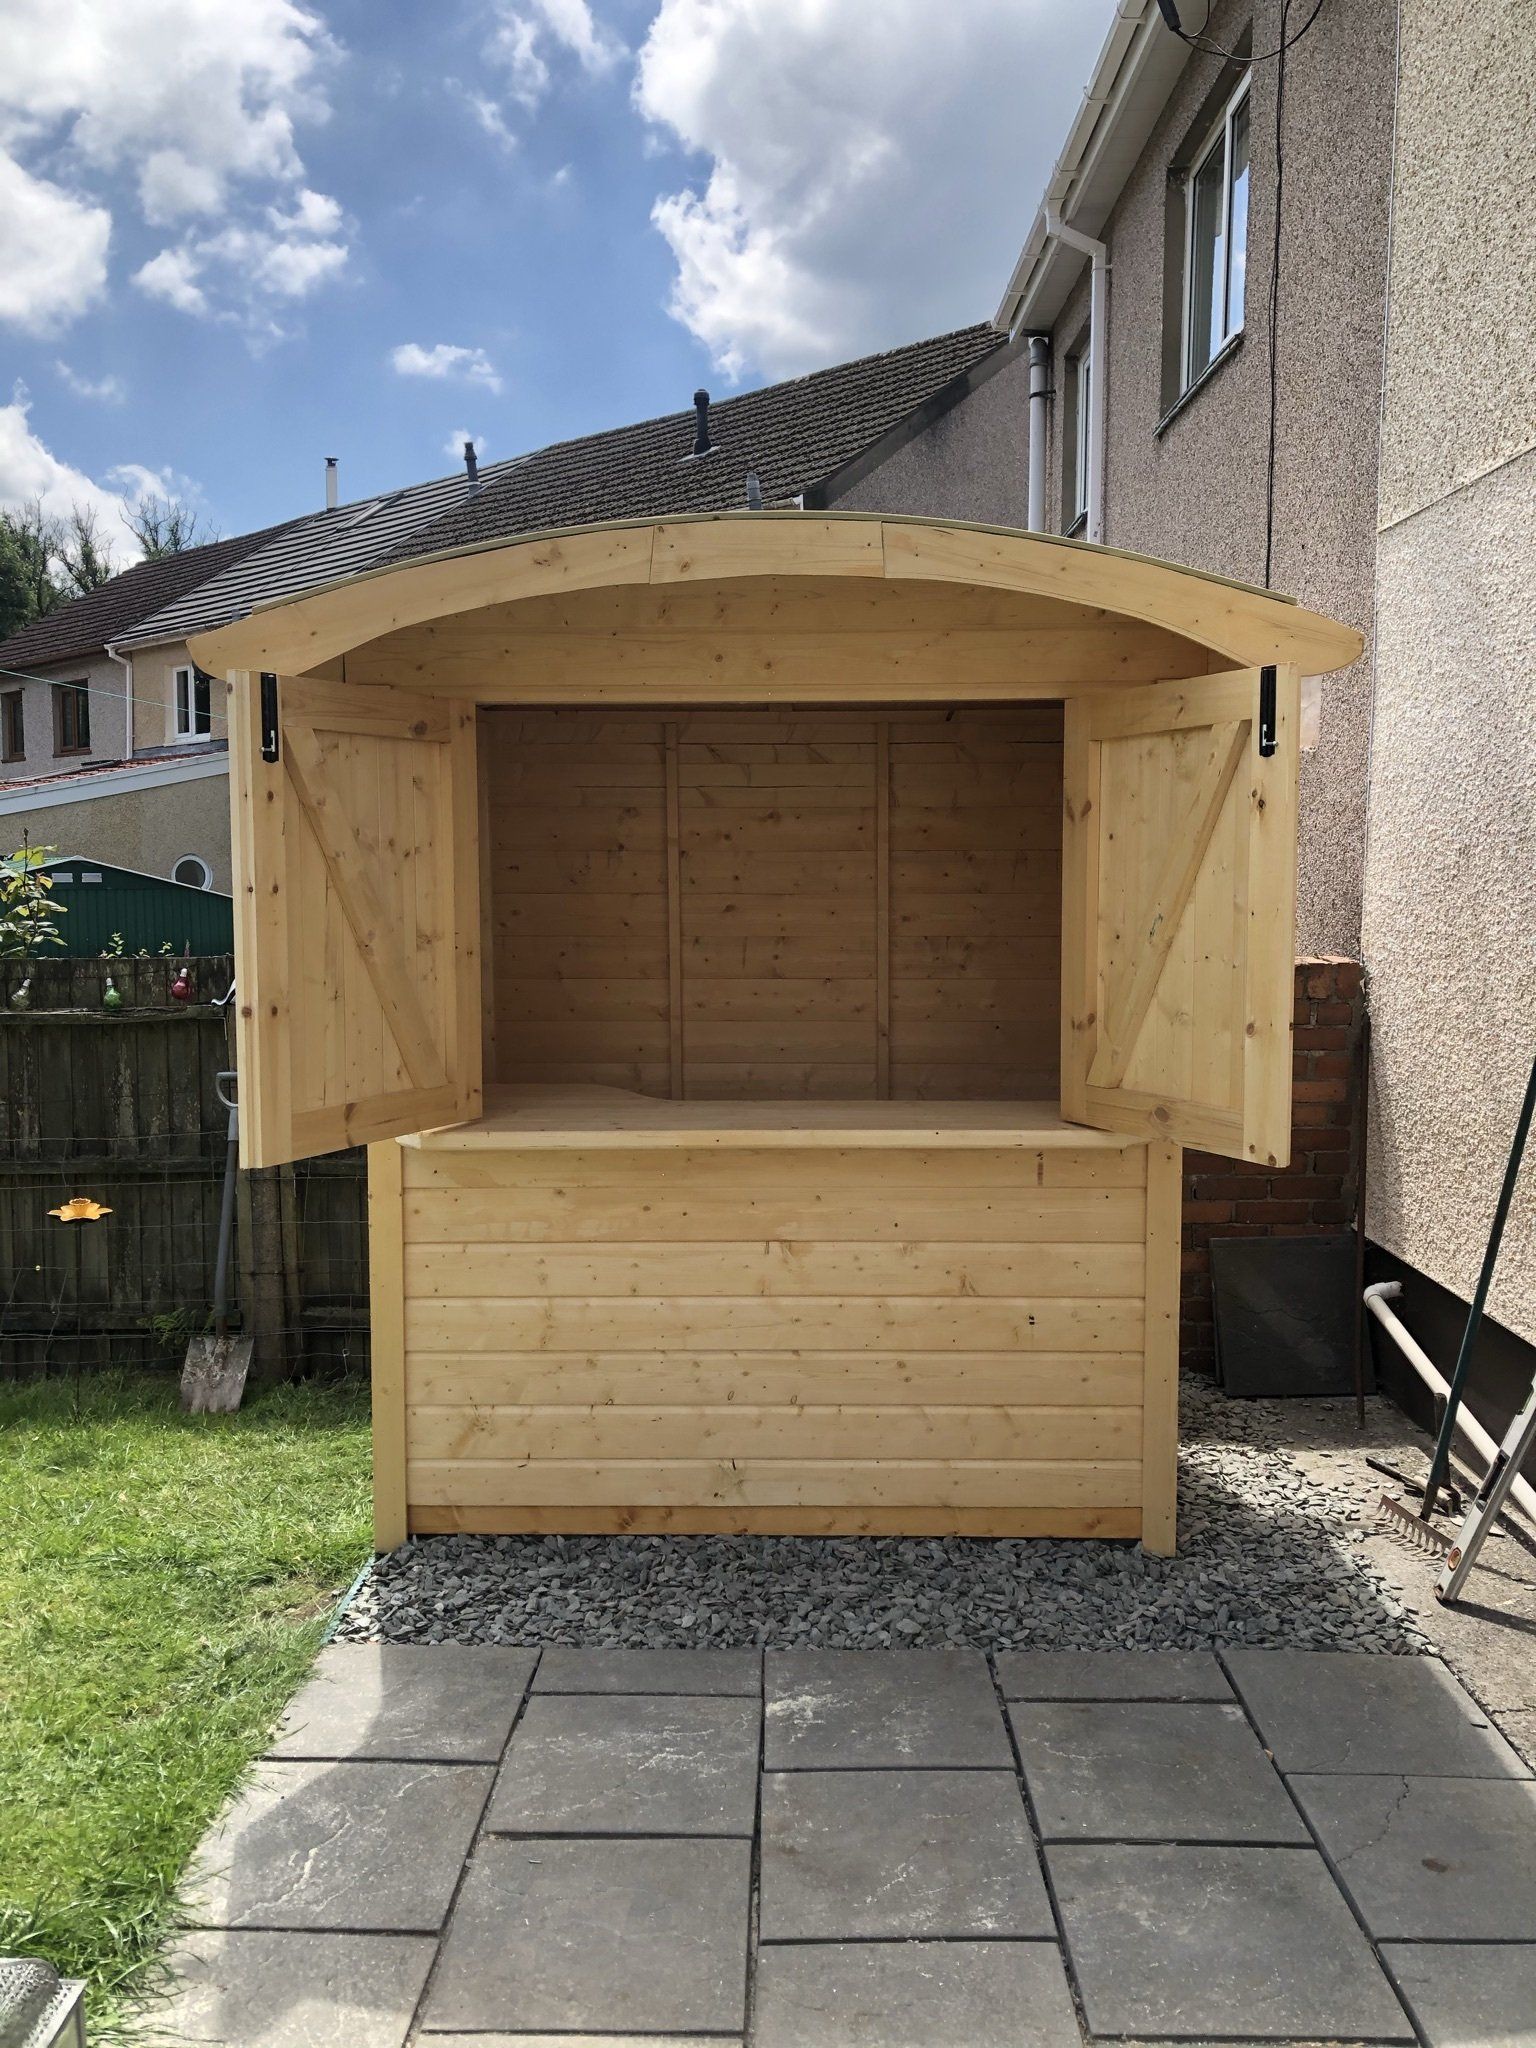 6' x 4' Curved roof bar with the doors open.